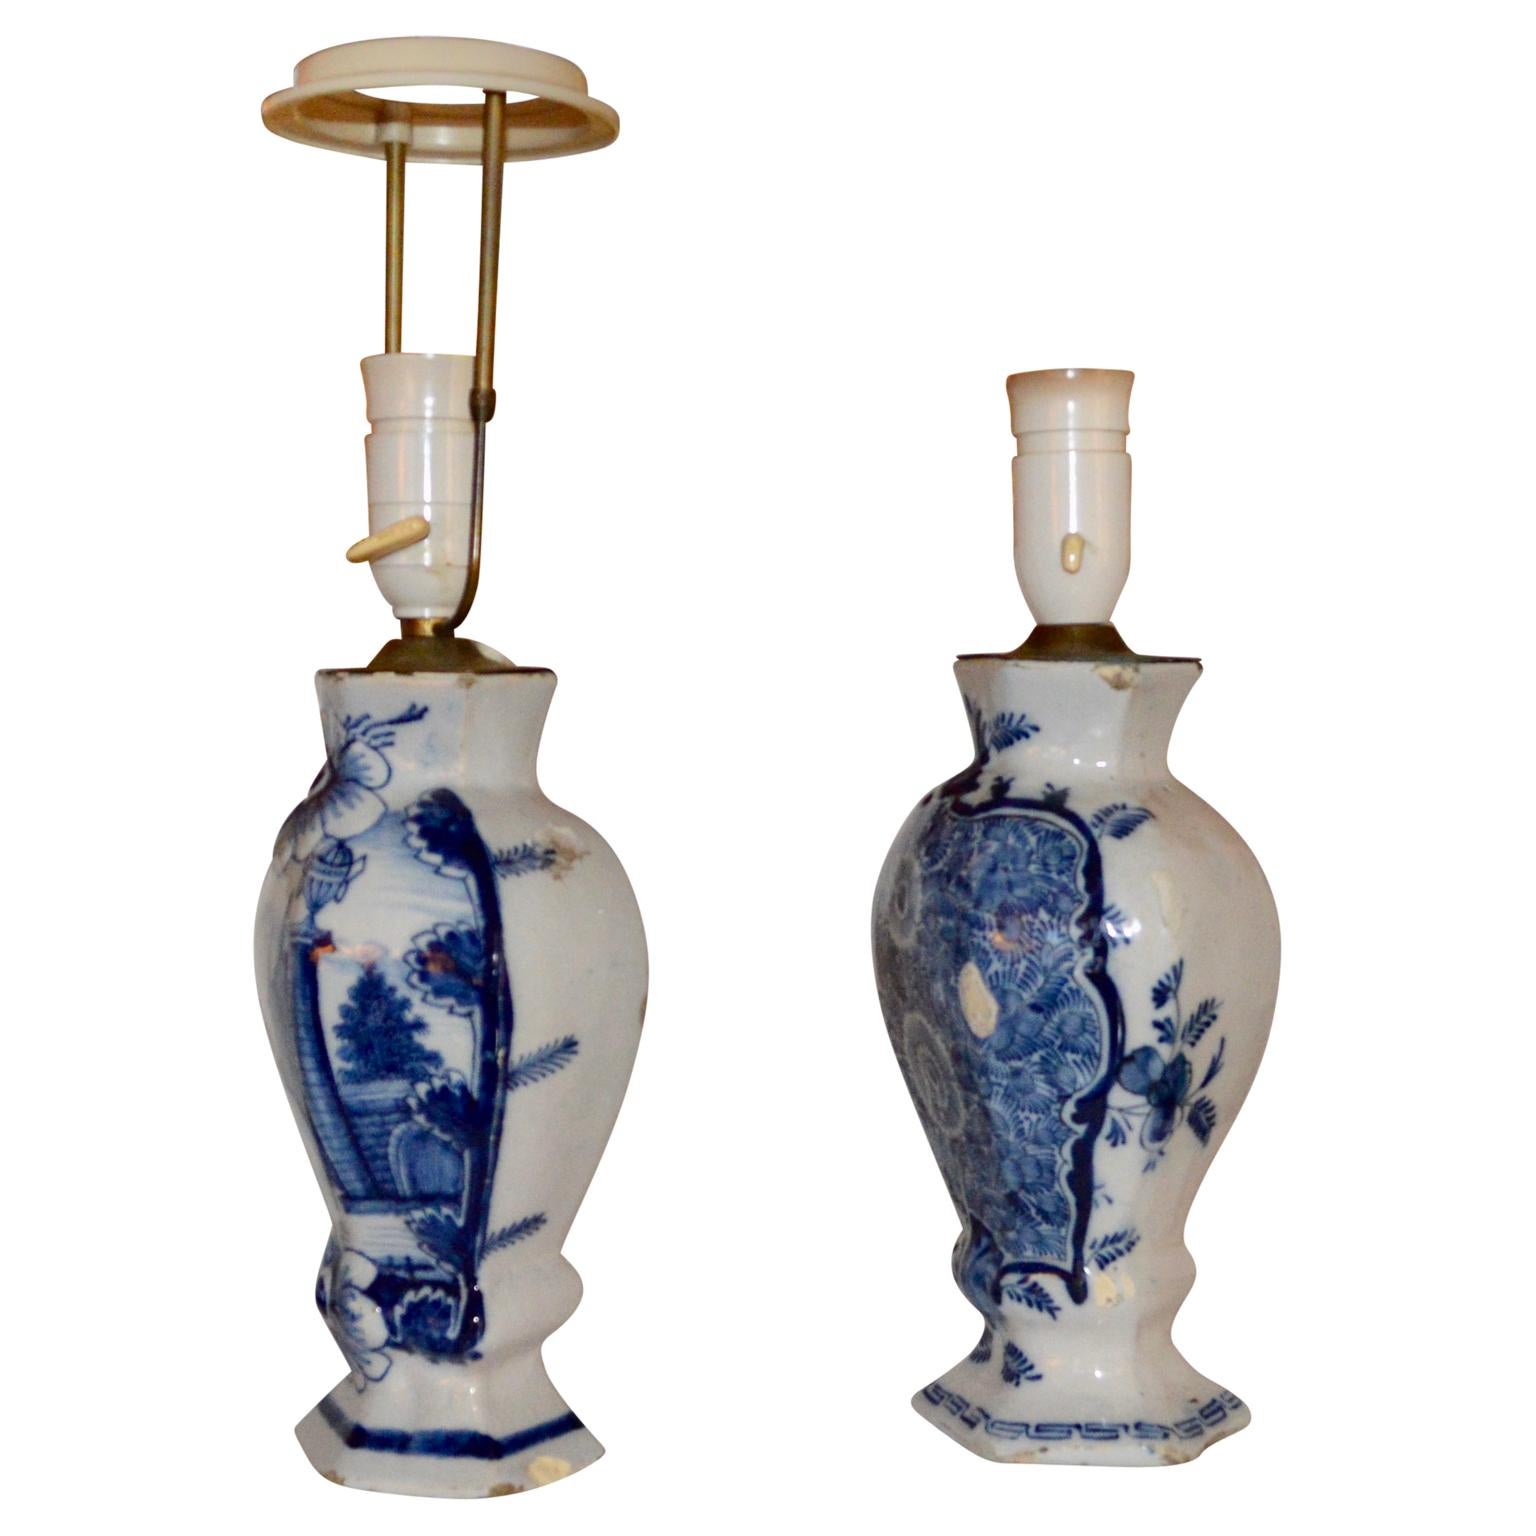 Pair Of 18th Century Blue And White Delft Table Lamps (18. Jahrhundert)